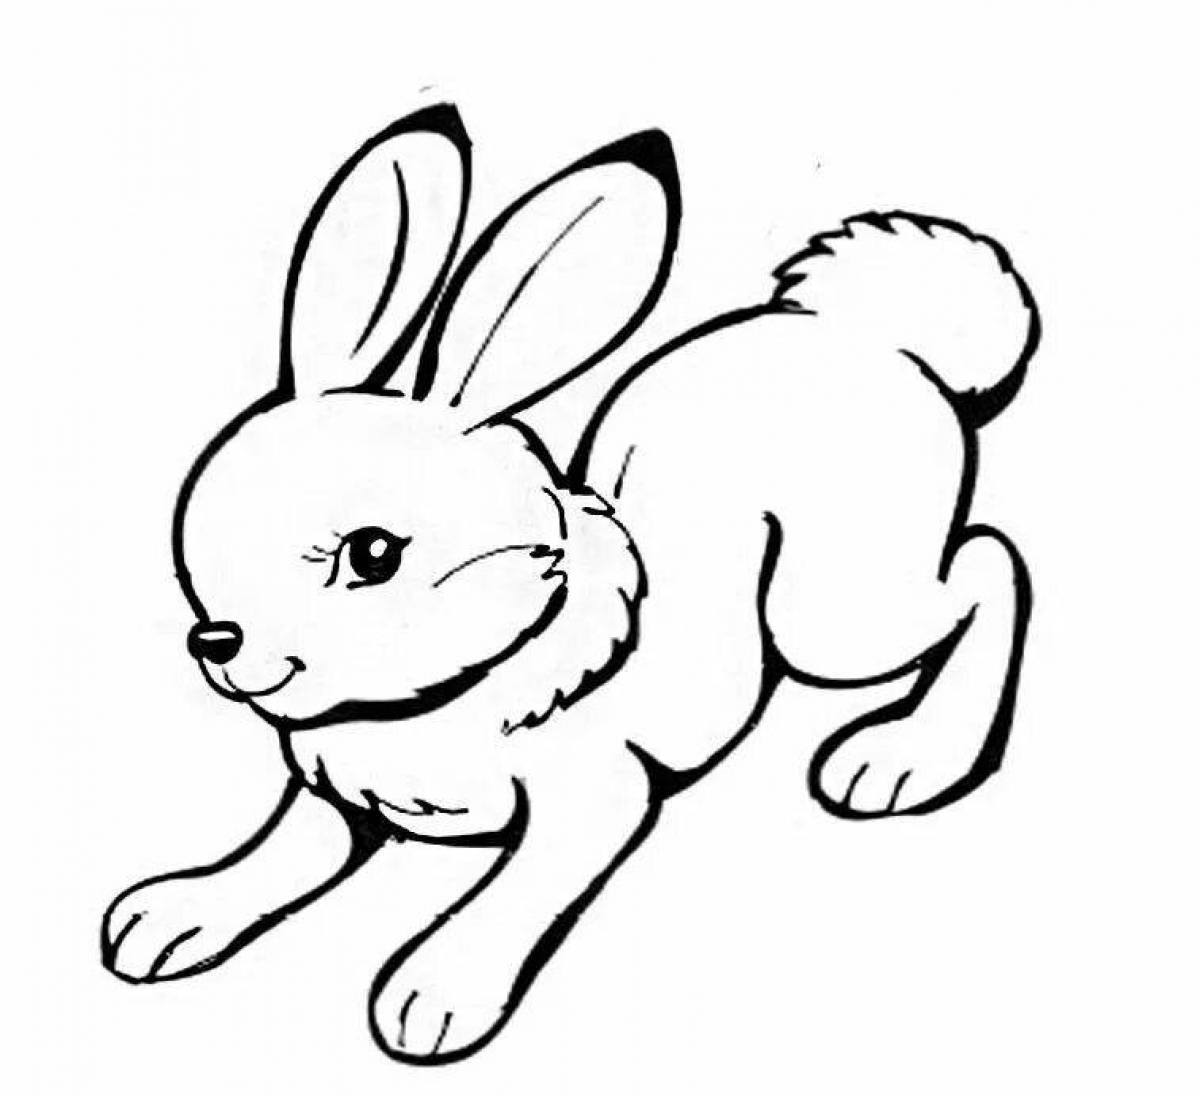 Awesome year of the hare coloring page